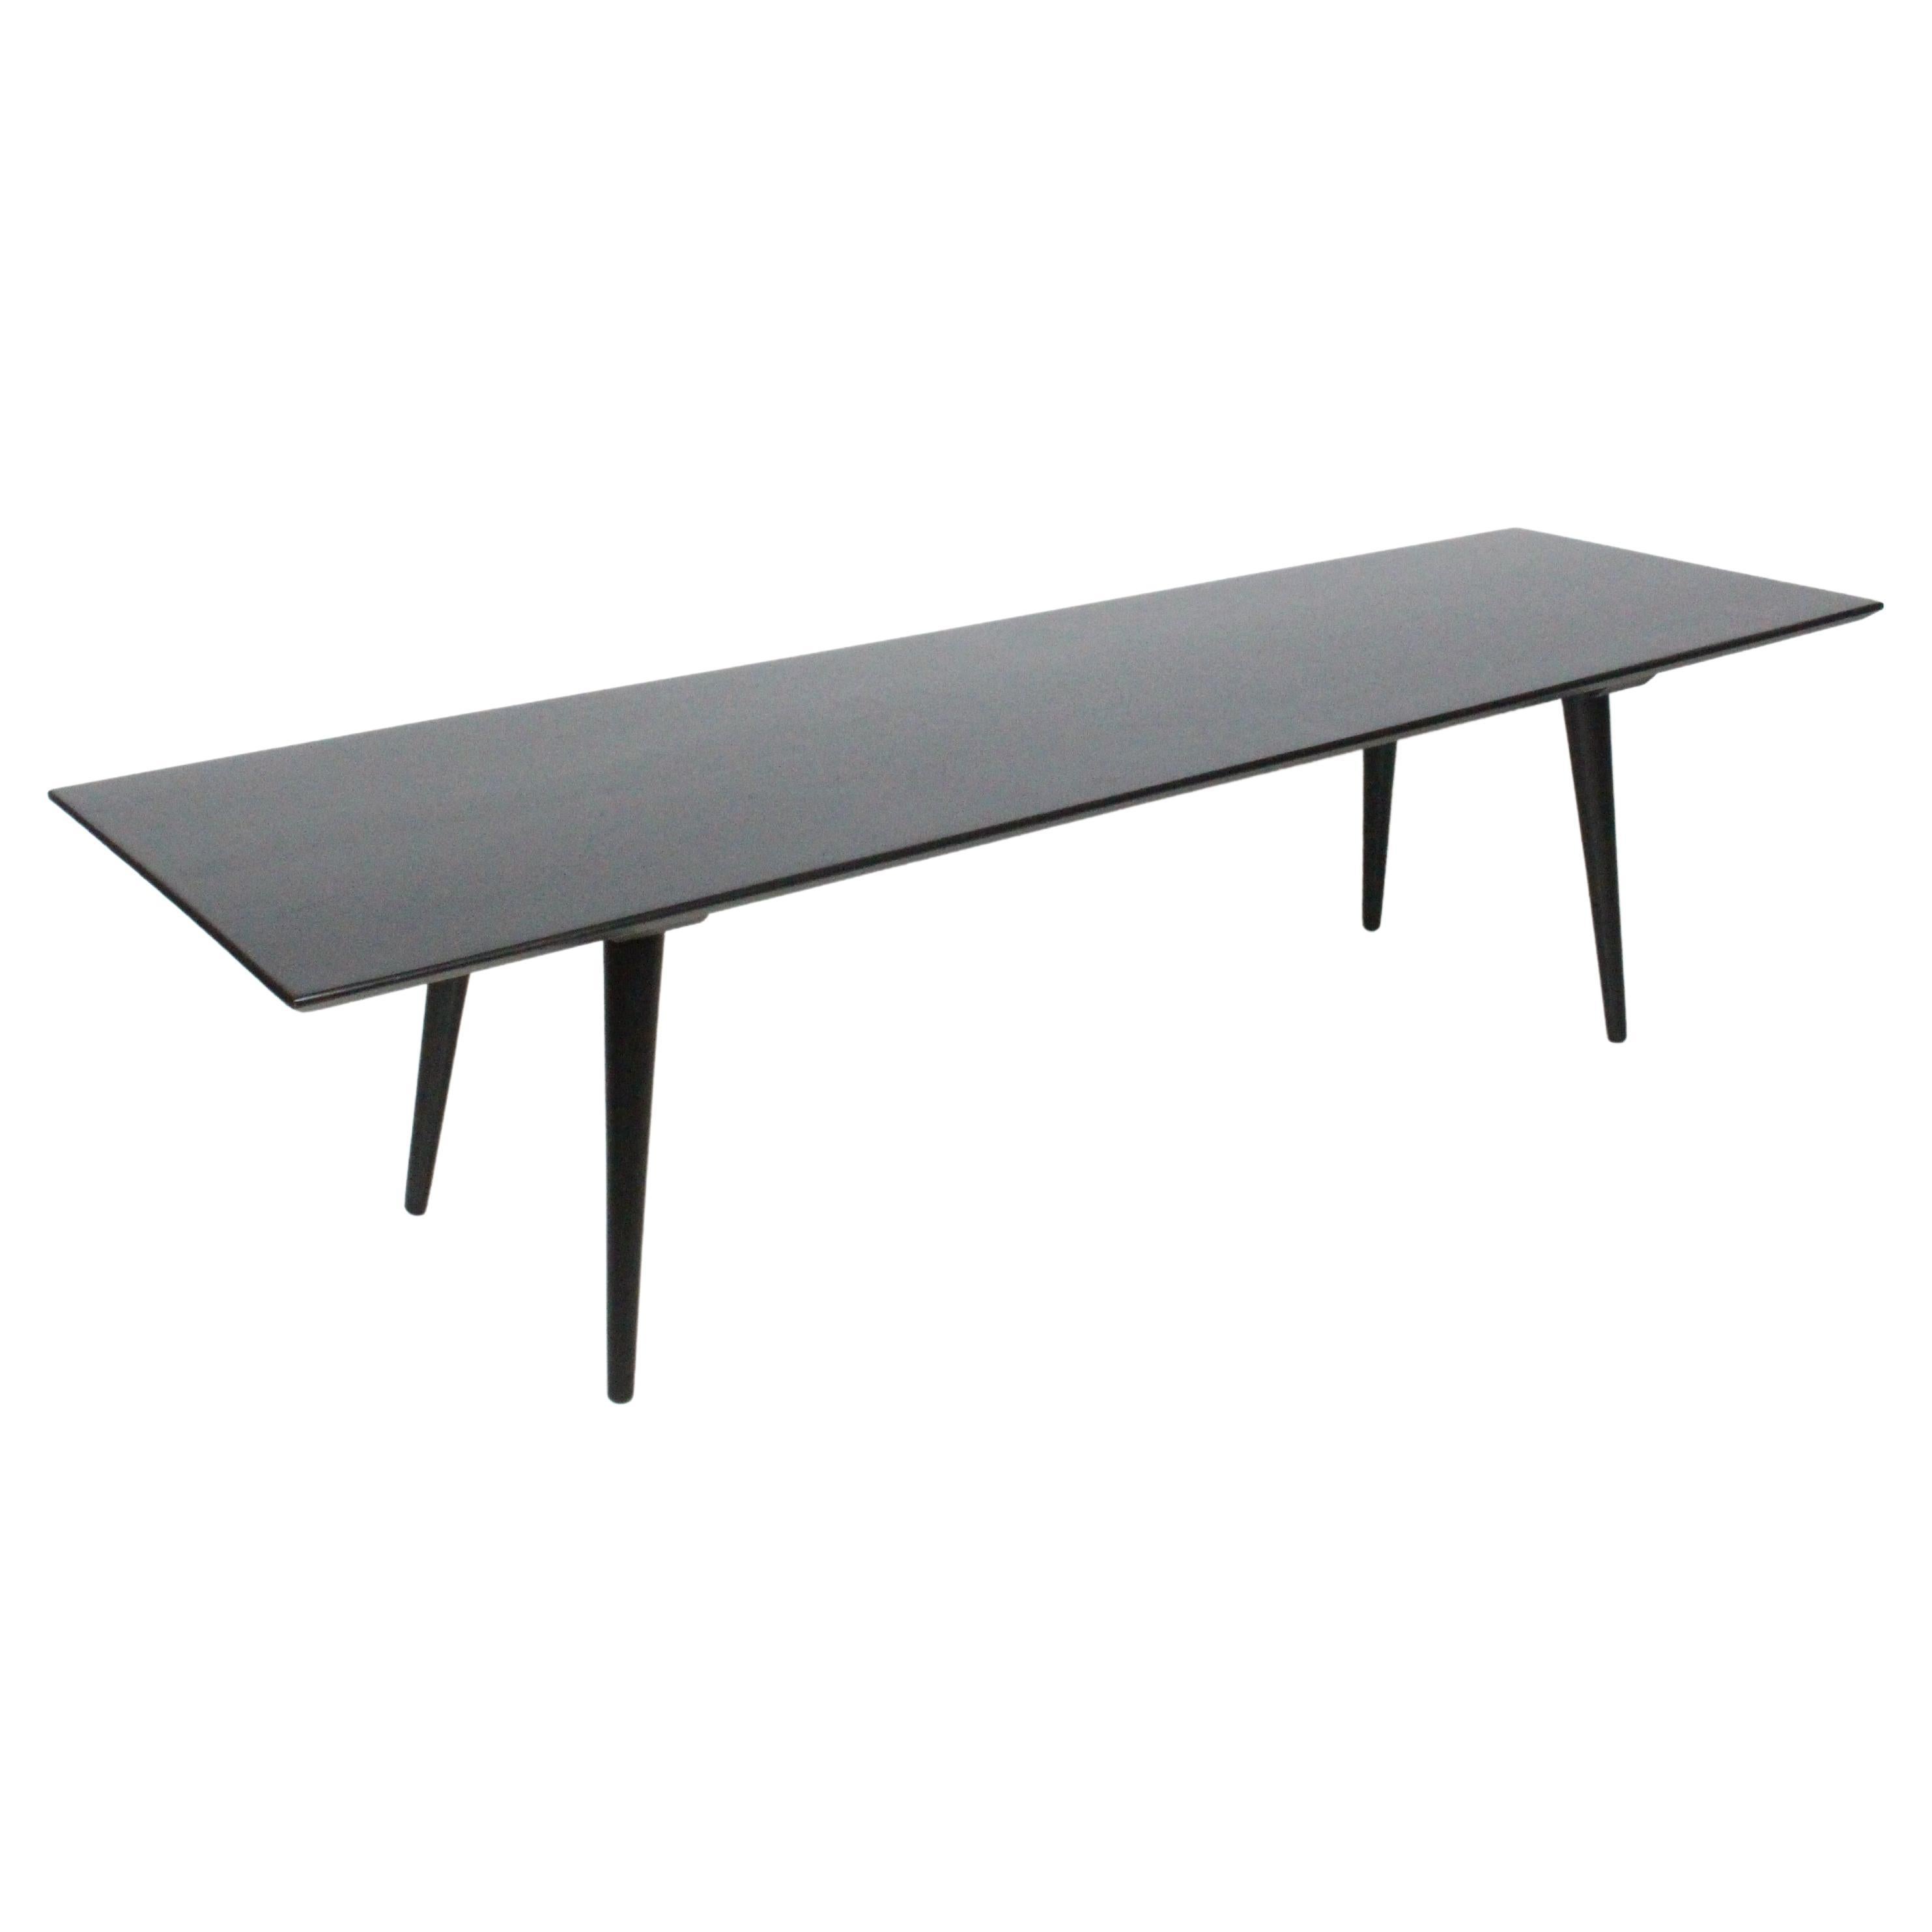 Paul McCobb Planner Group Five Foot Black Bench, Coffee Table